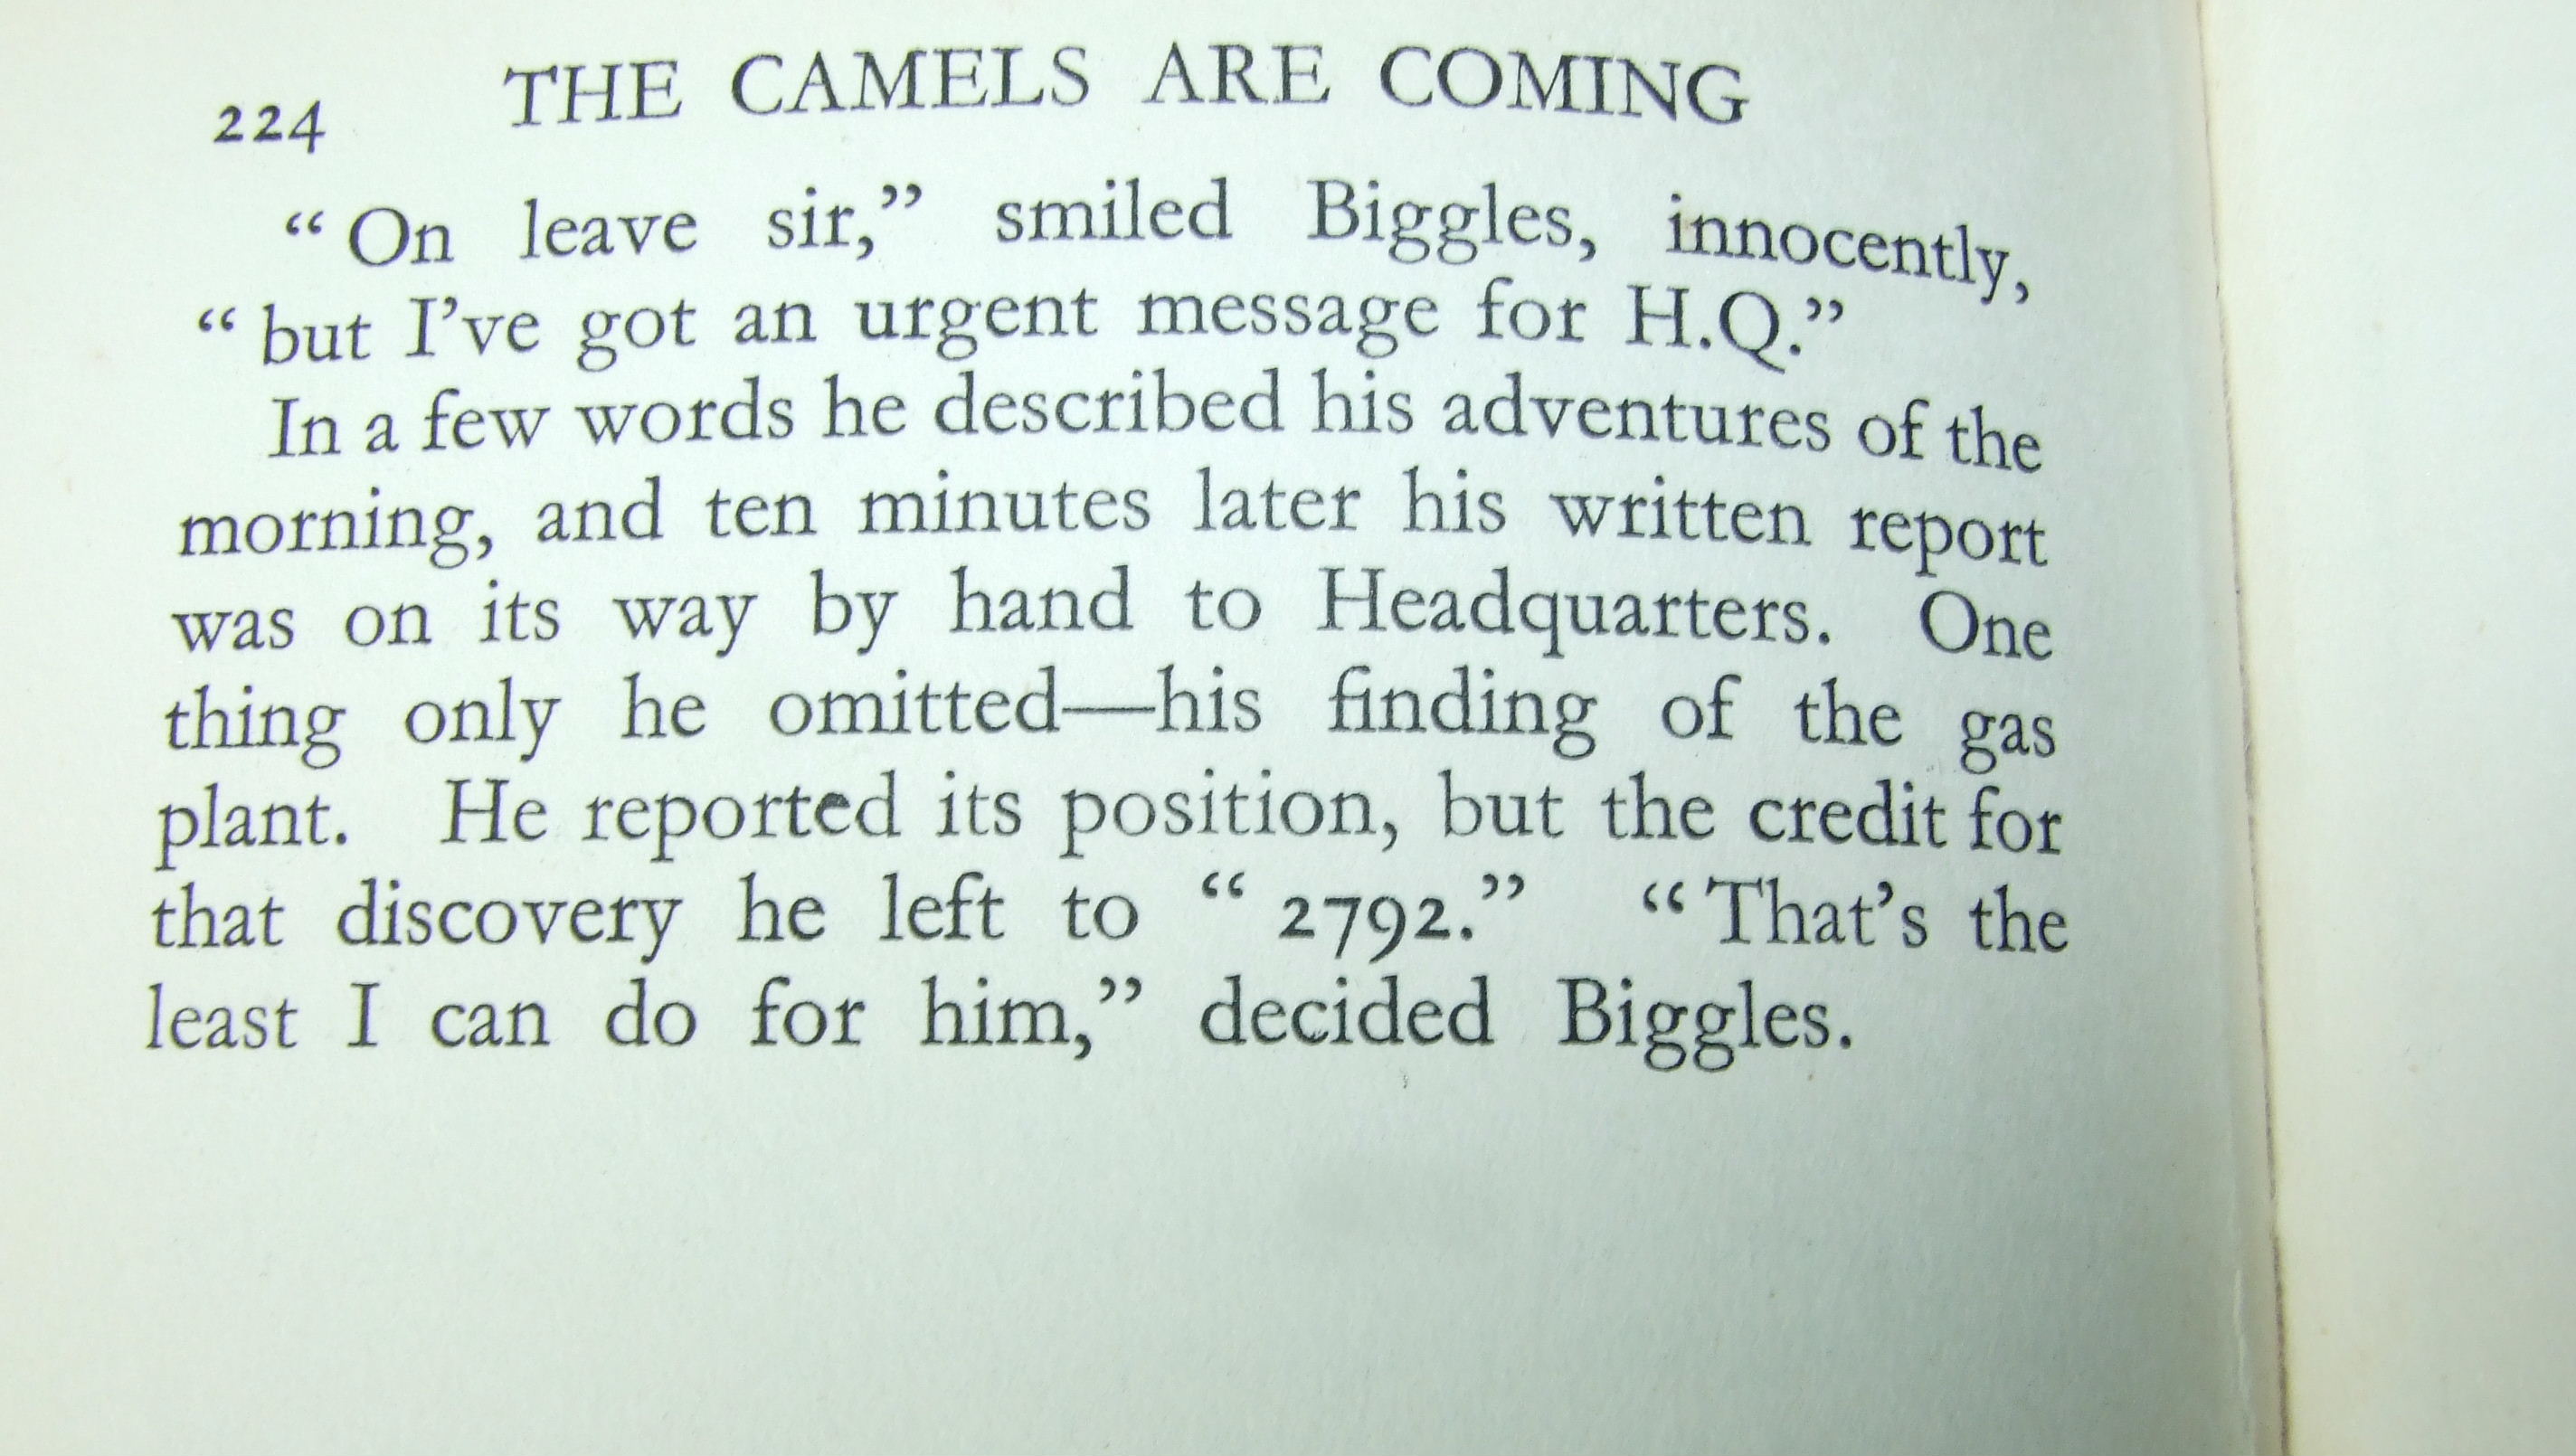 Johns (Capt. WE), The Camels are Coming, 3rd edn, no dwrp, illus, spring 1933 Sundial Editions - Image 2 of 2